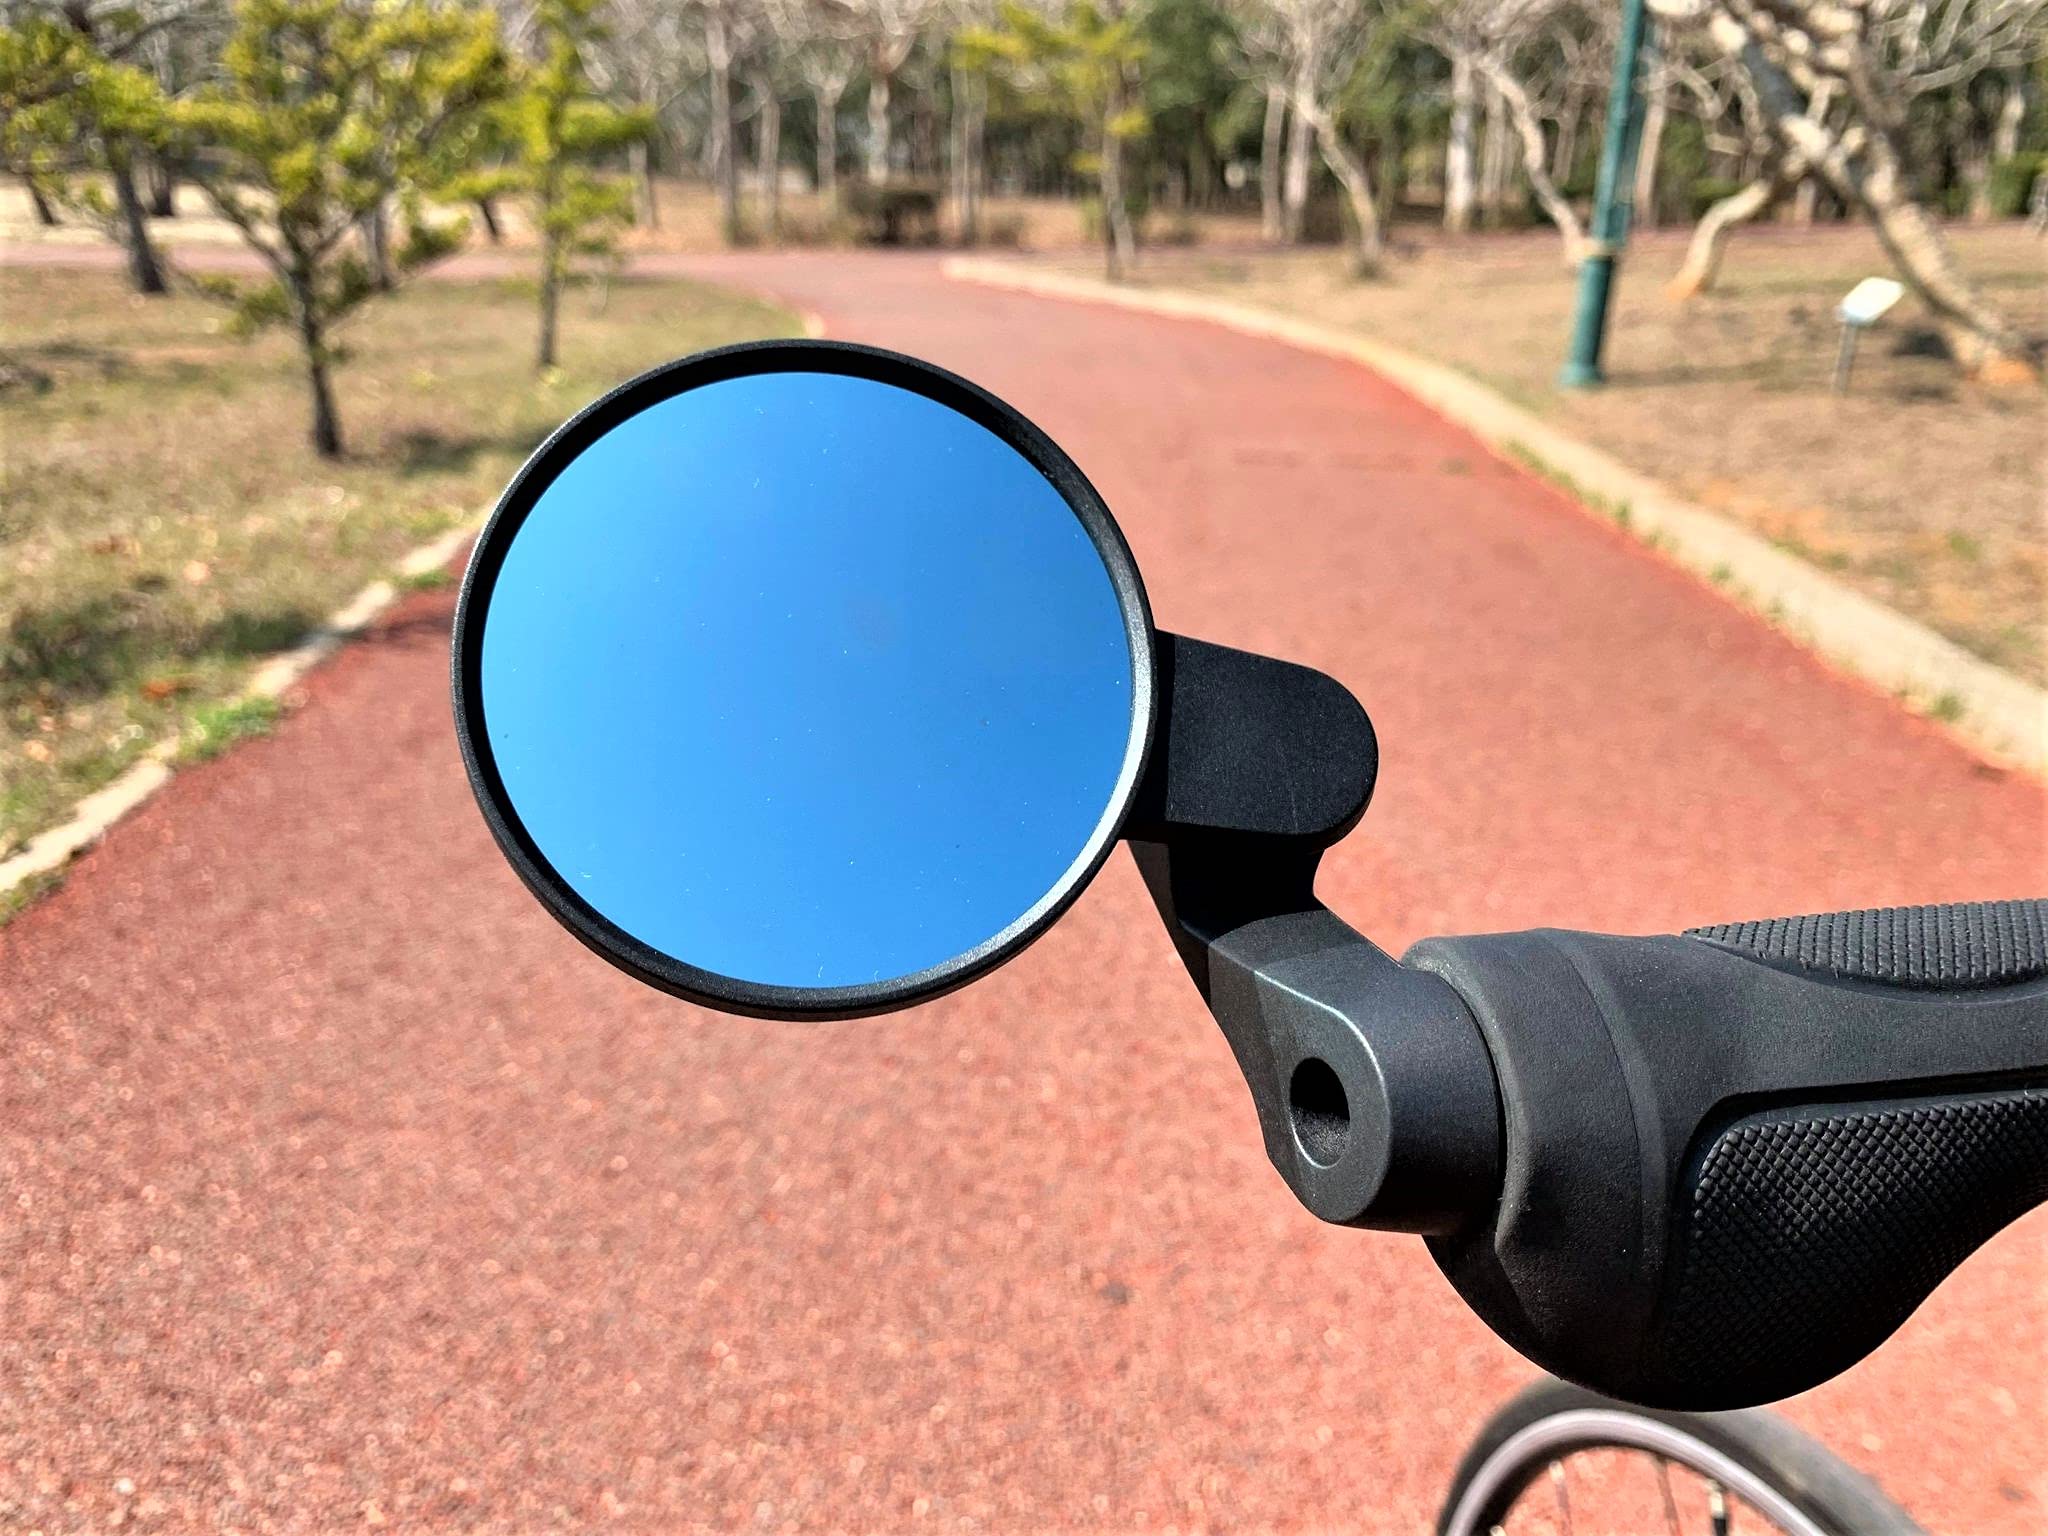 MEACHOW 2022 New Bar End Bike Mirror, 80mm Crystal UHD Automotive Grade Glass Lens E-Bike Mirrors, Scratch Resistant, Safe Rearview Mirrors, (Silver Left Side) ME-021LS